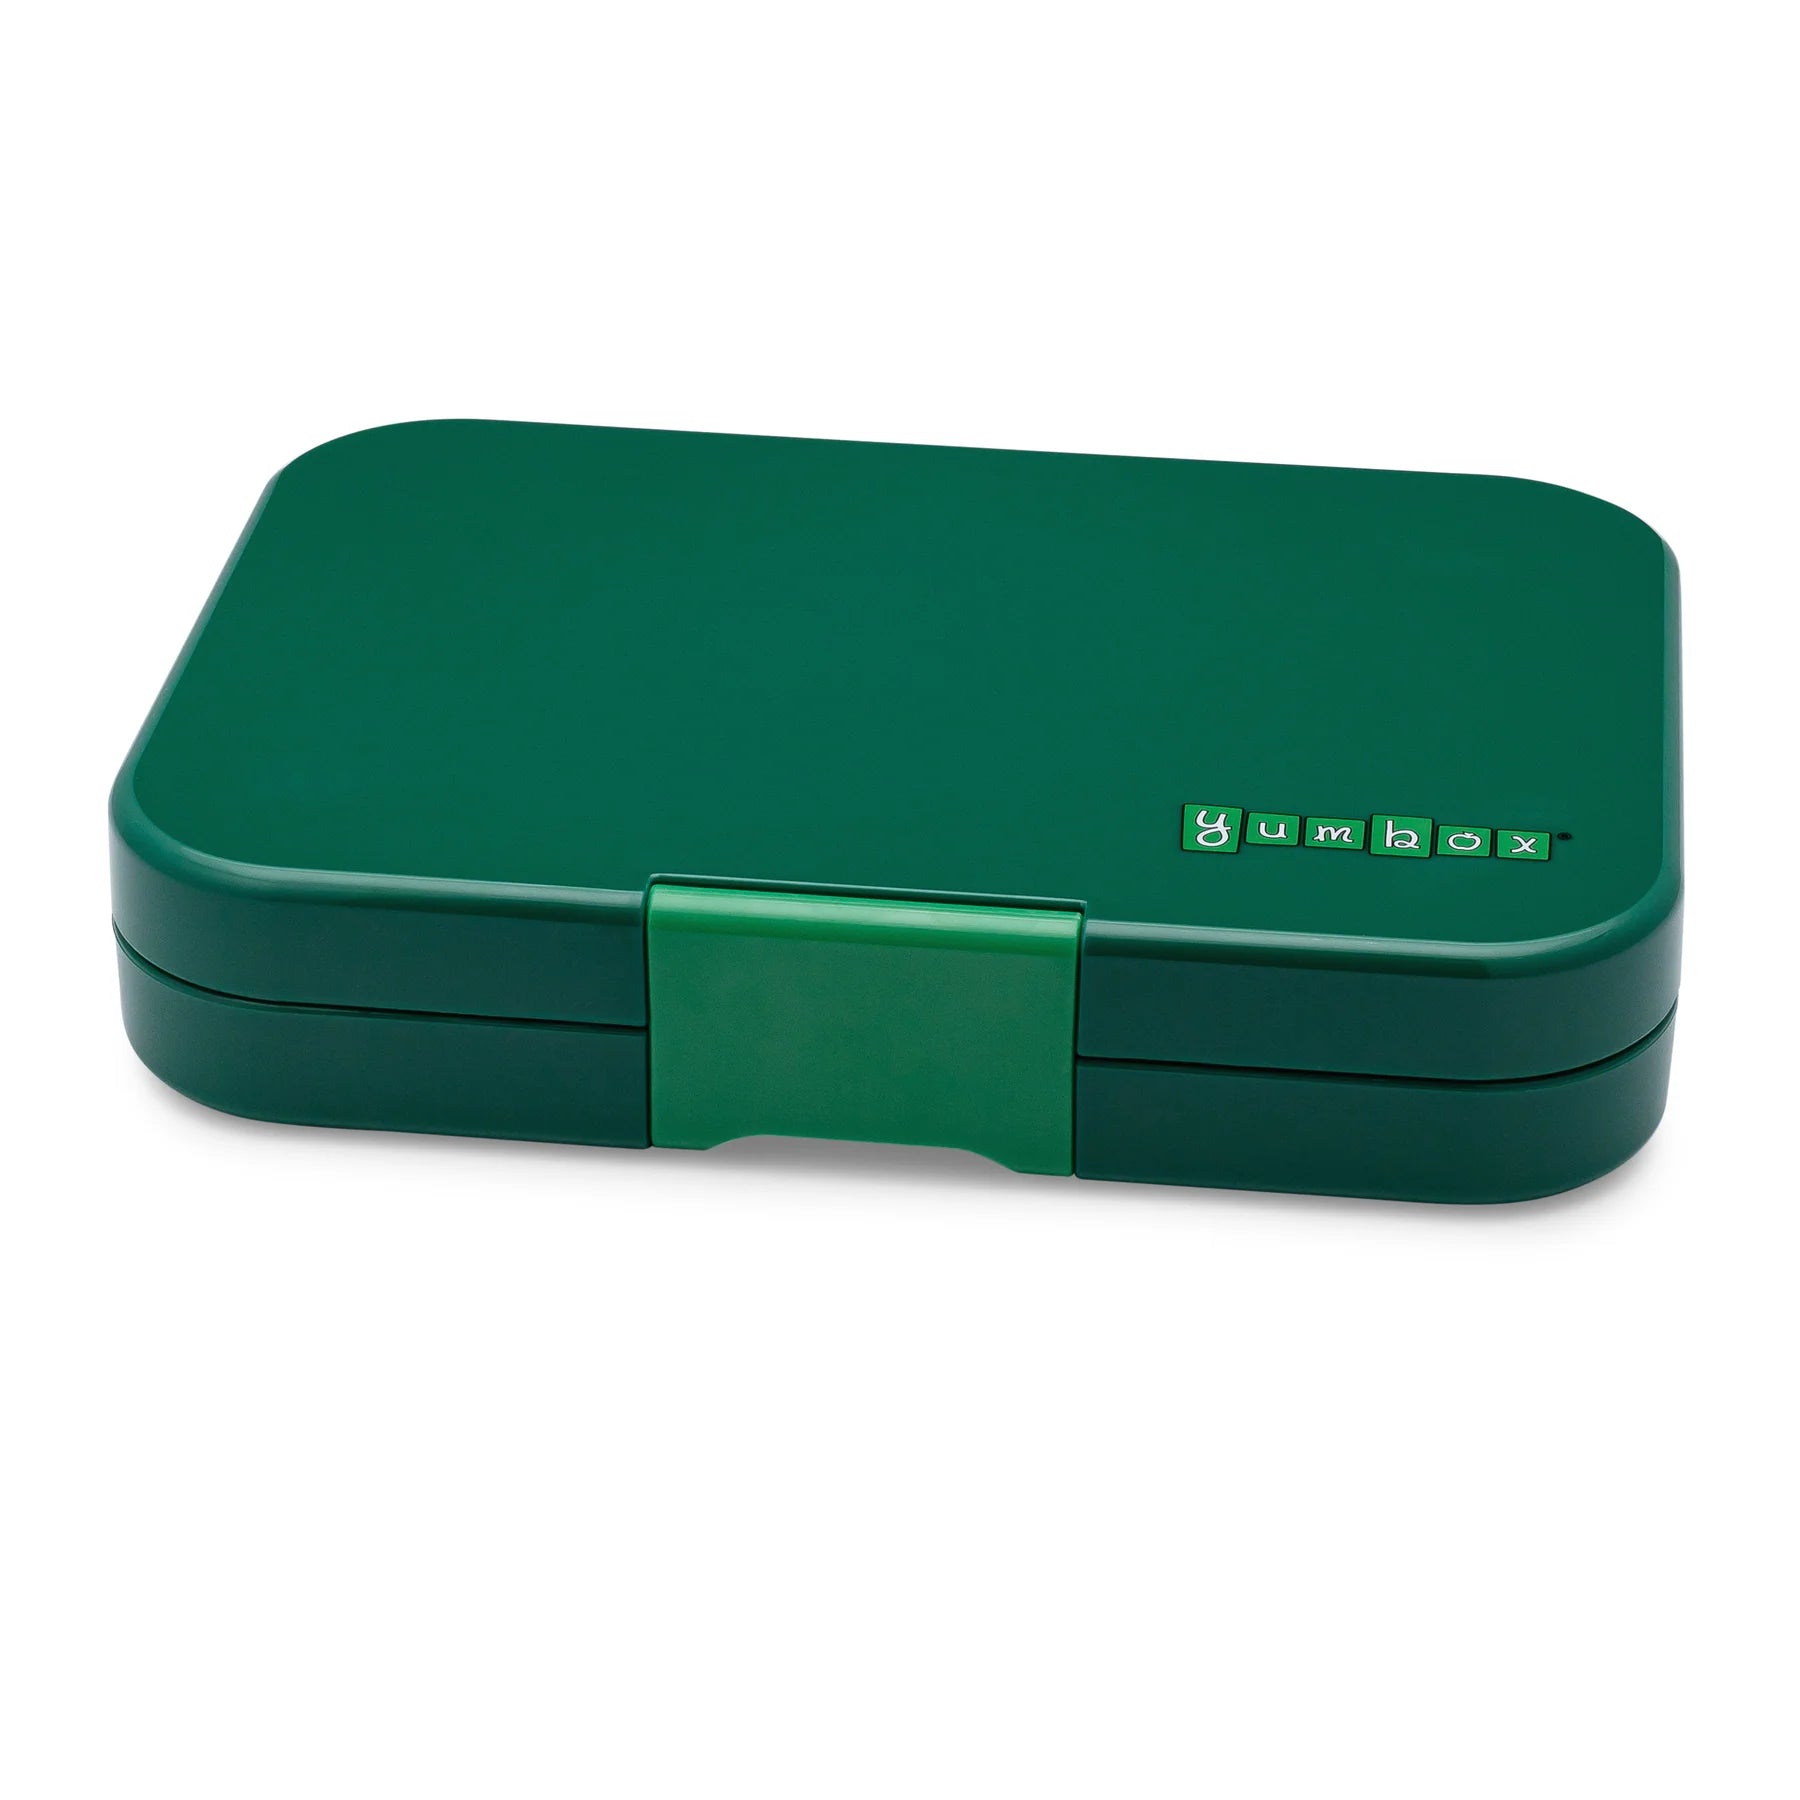 Yumbox Tapas 5-Compartment Food Tray - Greenwich Green/Clear Green